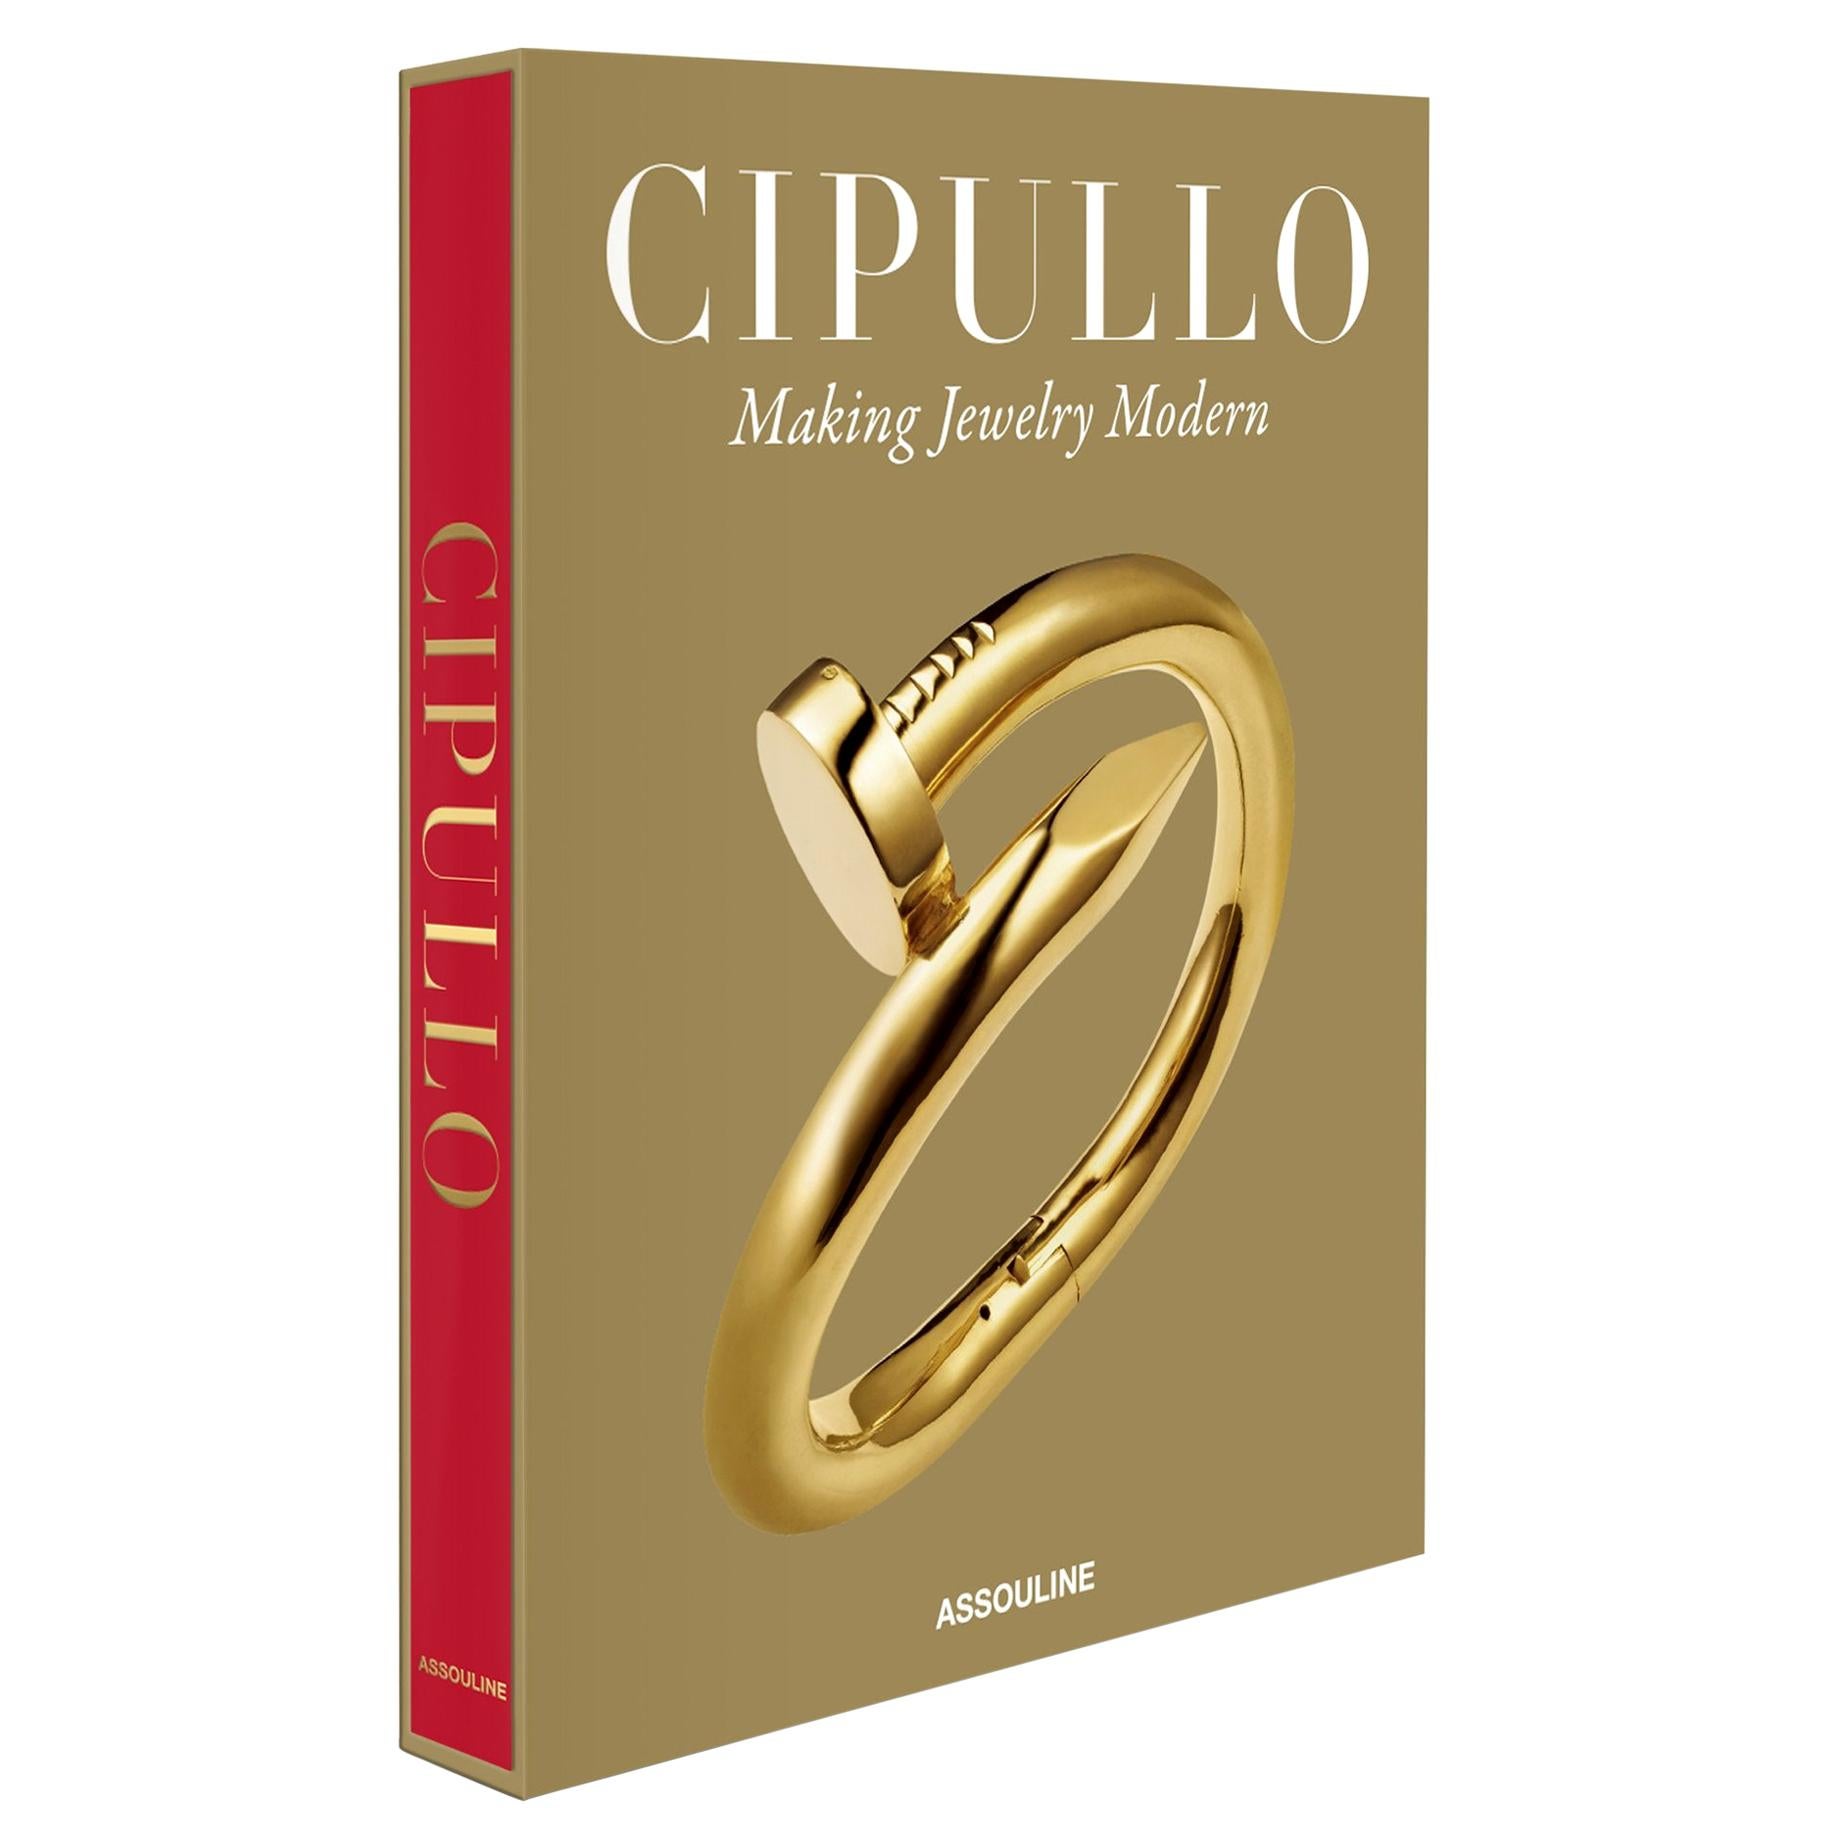 Born in Naples in 1935 to a family of jewelers, Aldo Cipullo became the most glamorous jewelry designer of the 1970s and early 1980s. Aldo left Italy for the exciting possibilities of life in New York City, enrolling at the School of Visual Arts. By